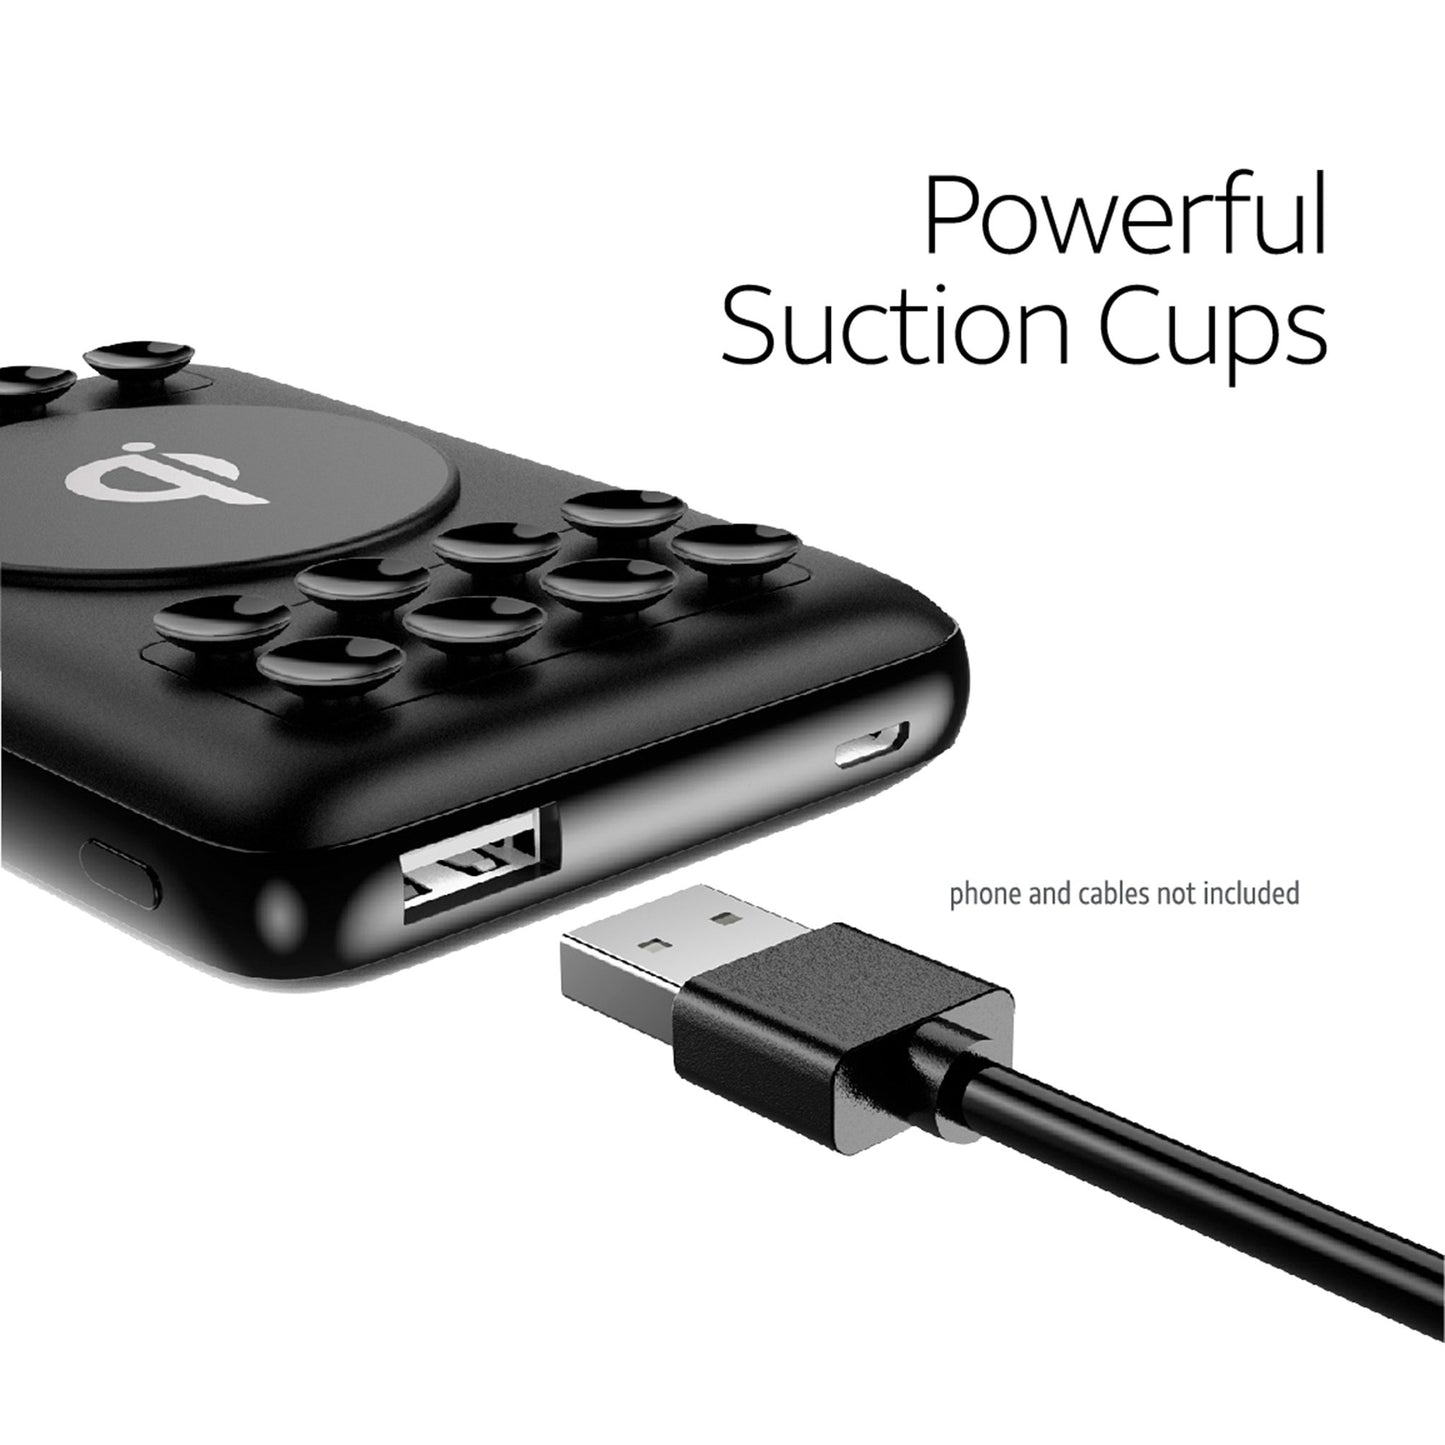 AT&T CETQPB10BLK 10,000 mAh Portable Wireless Suction Power Bank